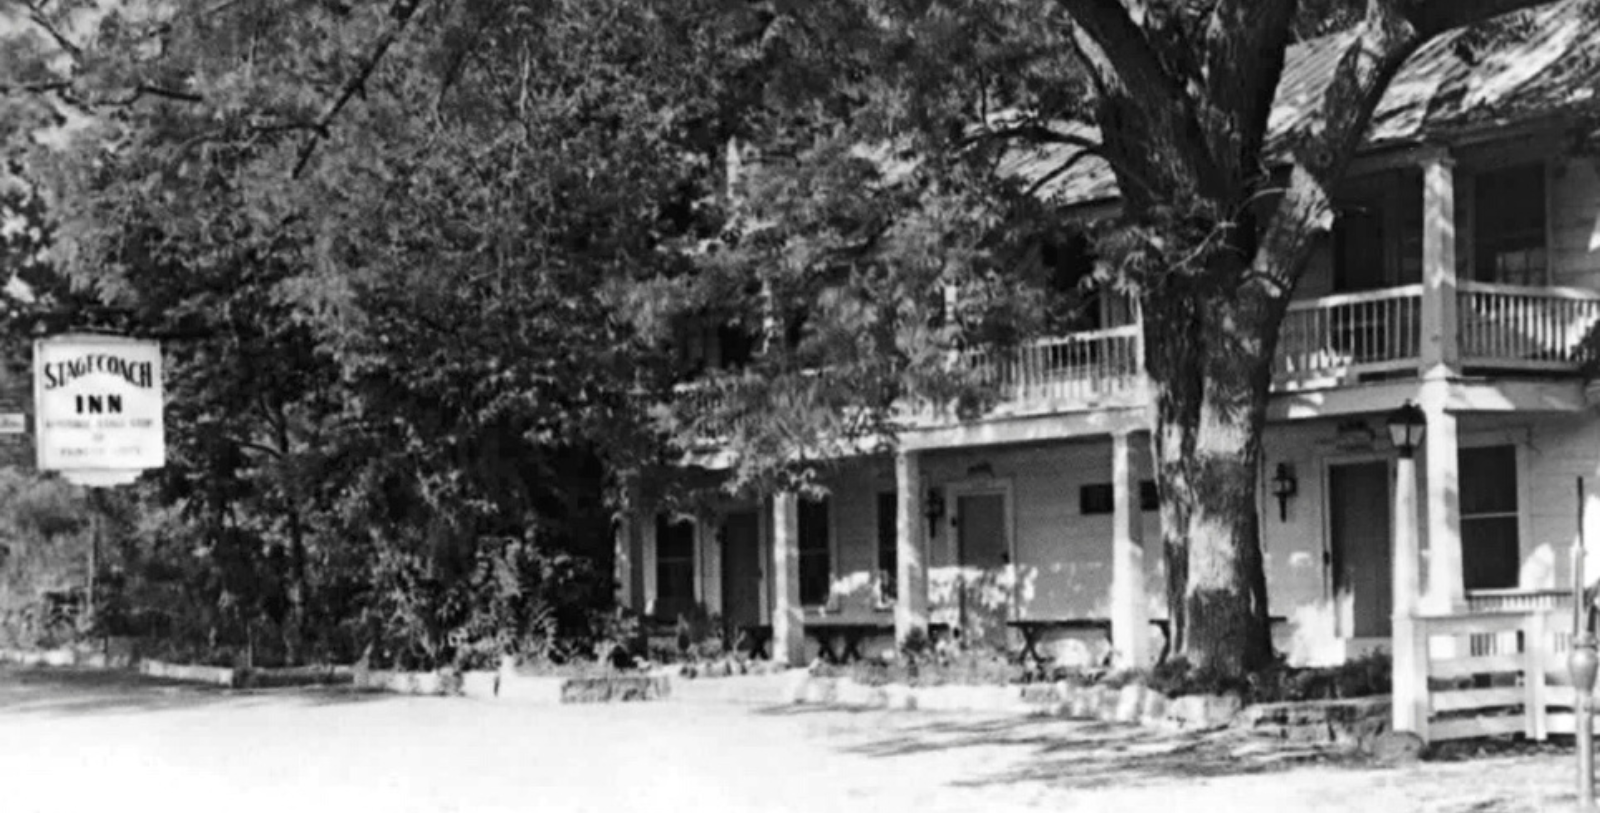 Historic Image of Hotel Exterior The Stagecoach Inn, 1852, Member of Historic Hotels of America, in Salado, Texas, Discover